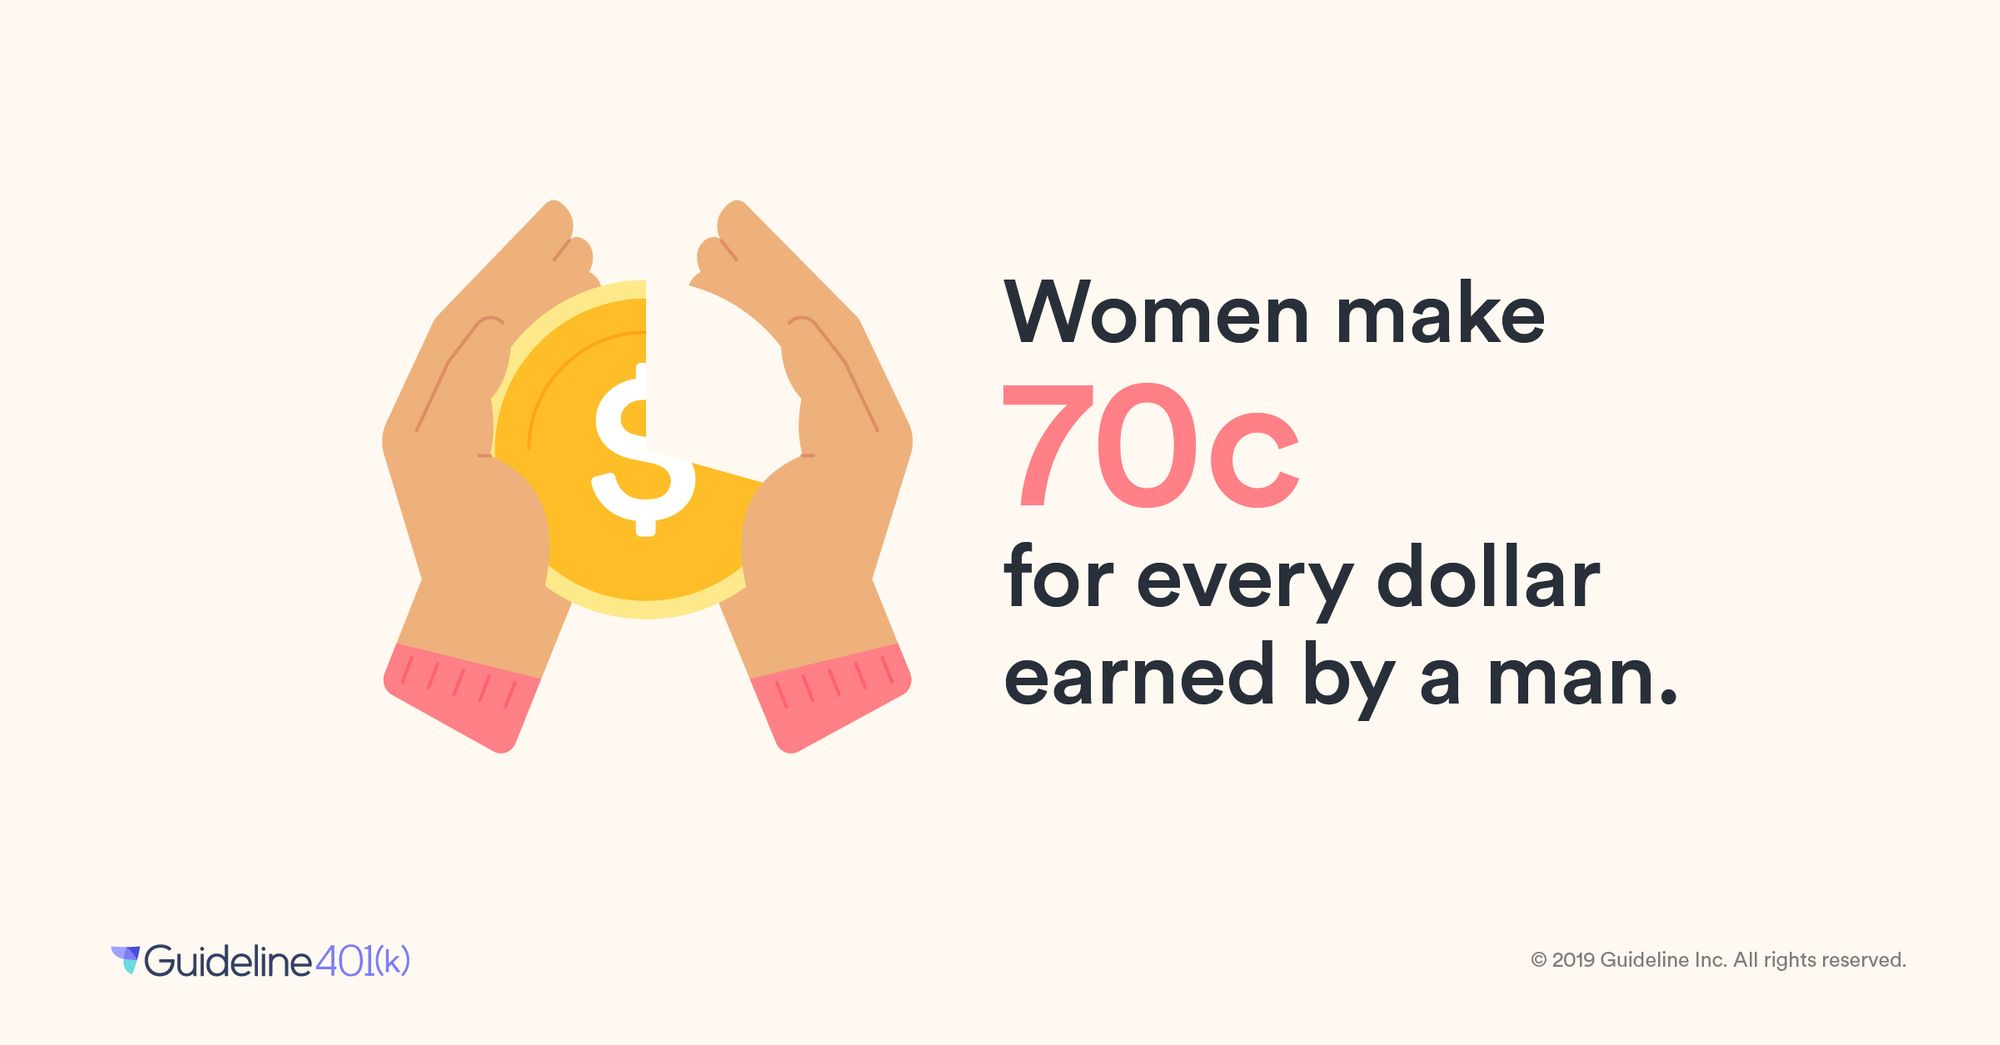 Women make 70c for every dollar earned by a man